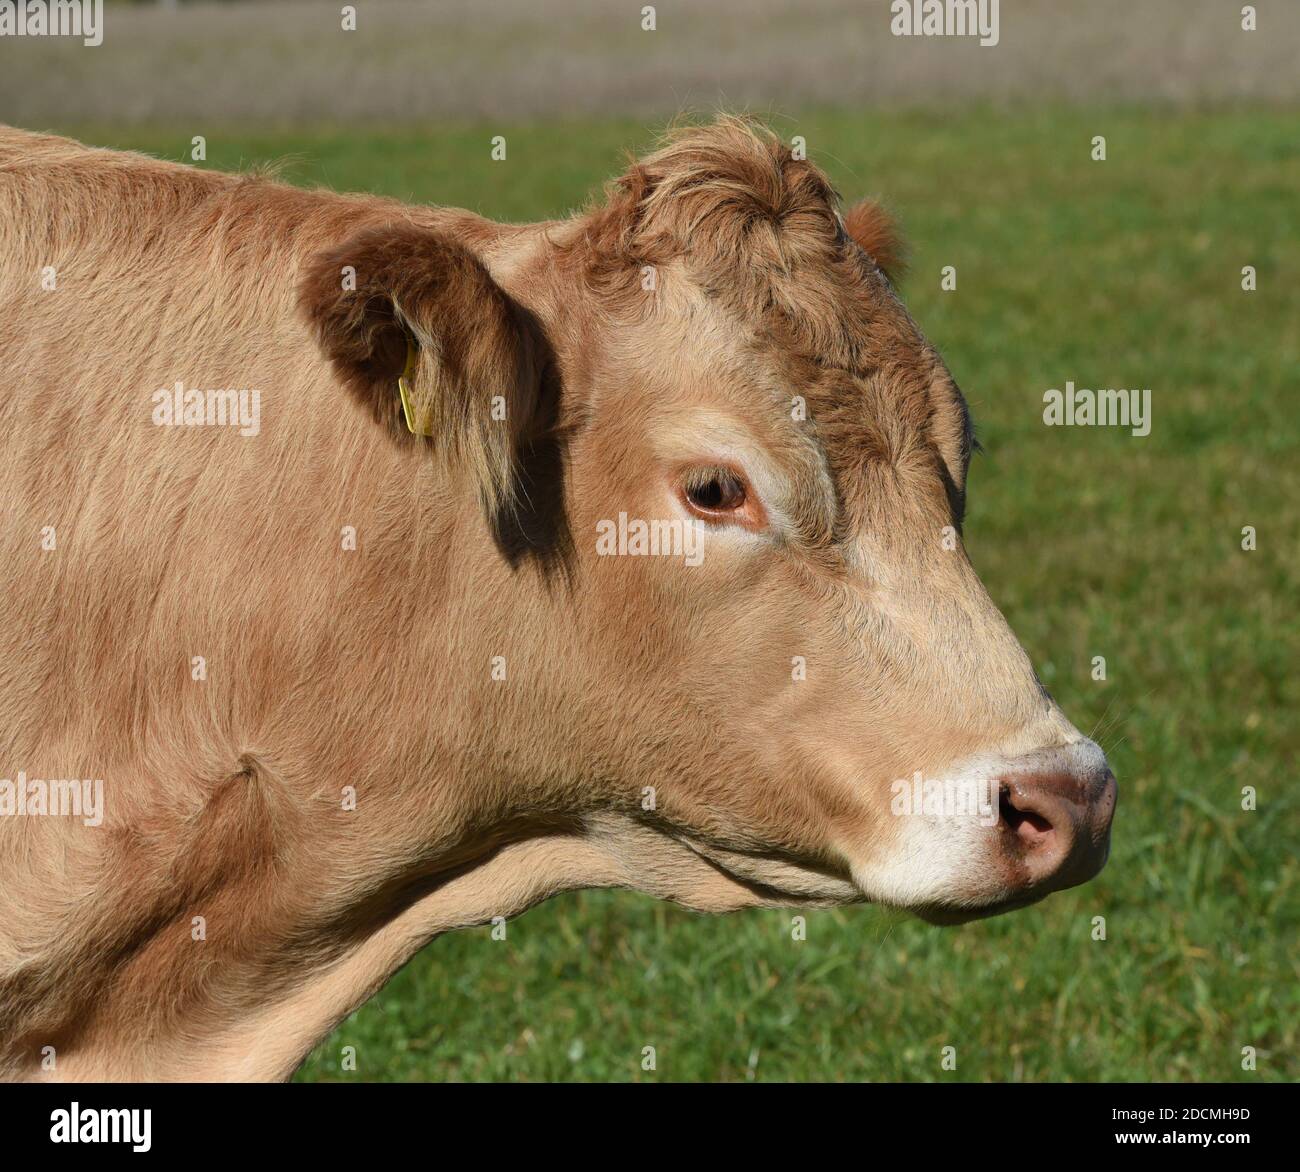 Kuhweide mit Rinder der Rasse Aquitaine. Cow pasture with cattle of the Aquitaine breed. Stock Photo